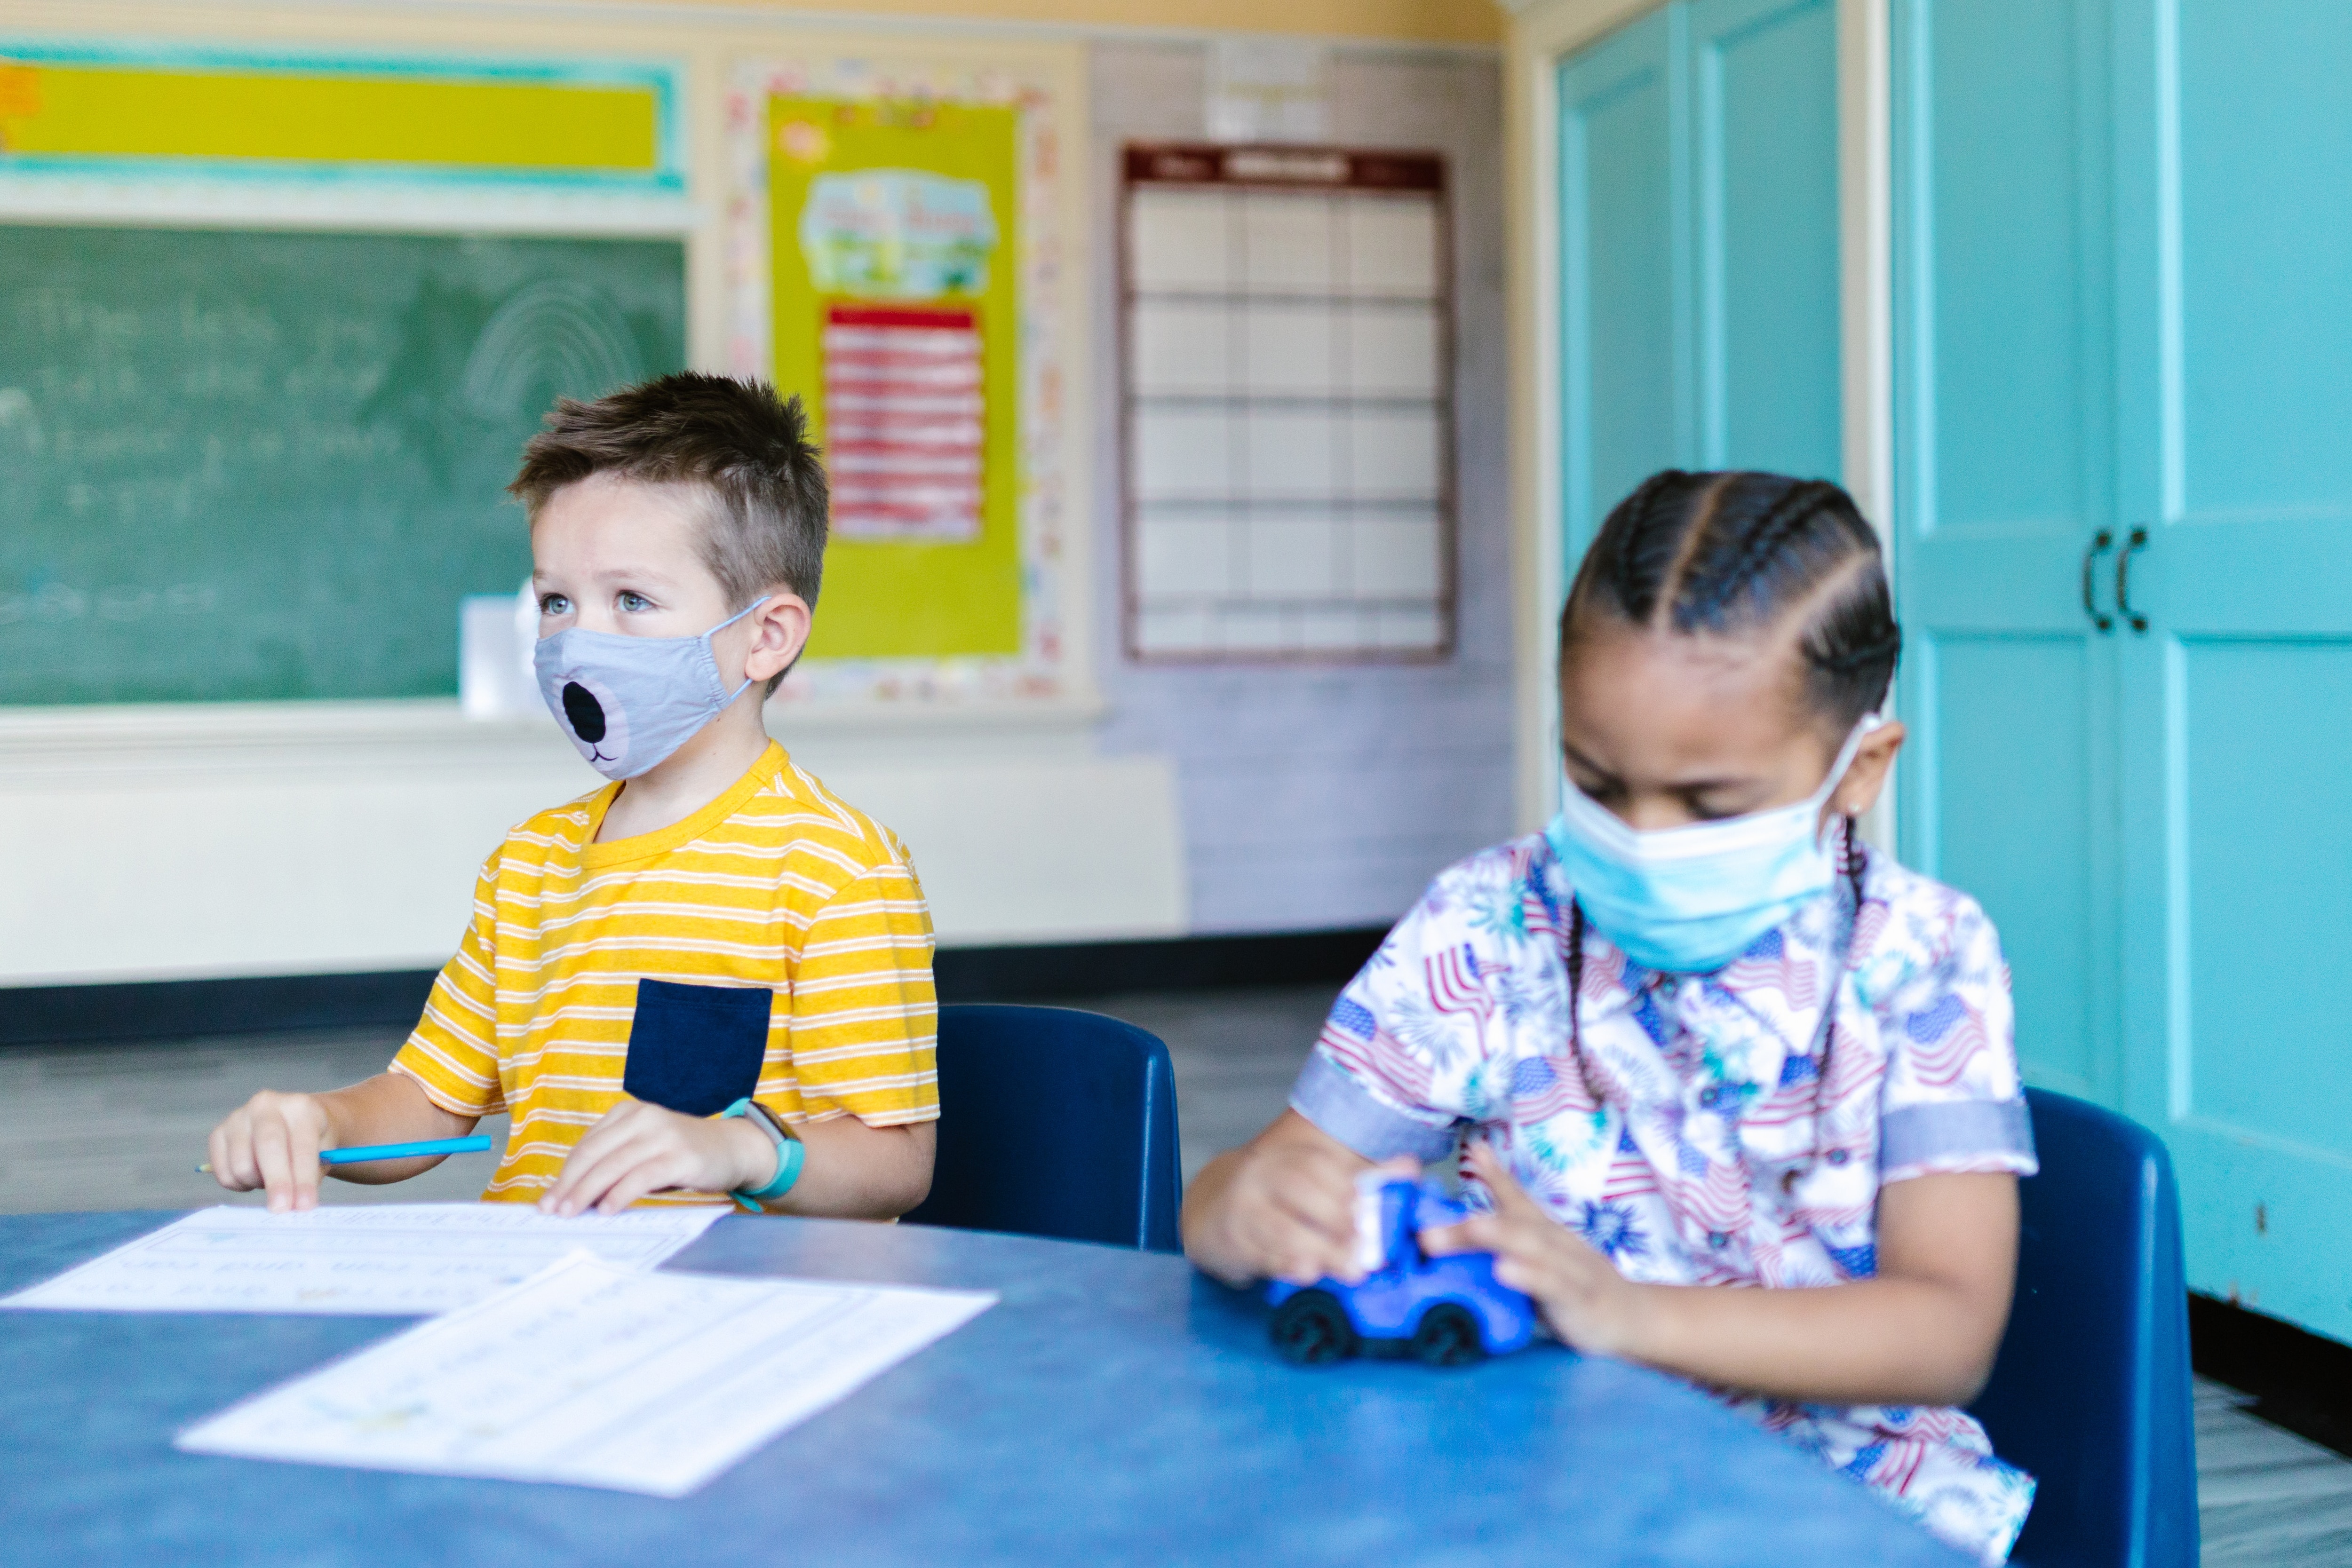 Children wear mask while studying in a classroom